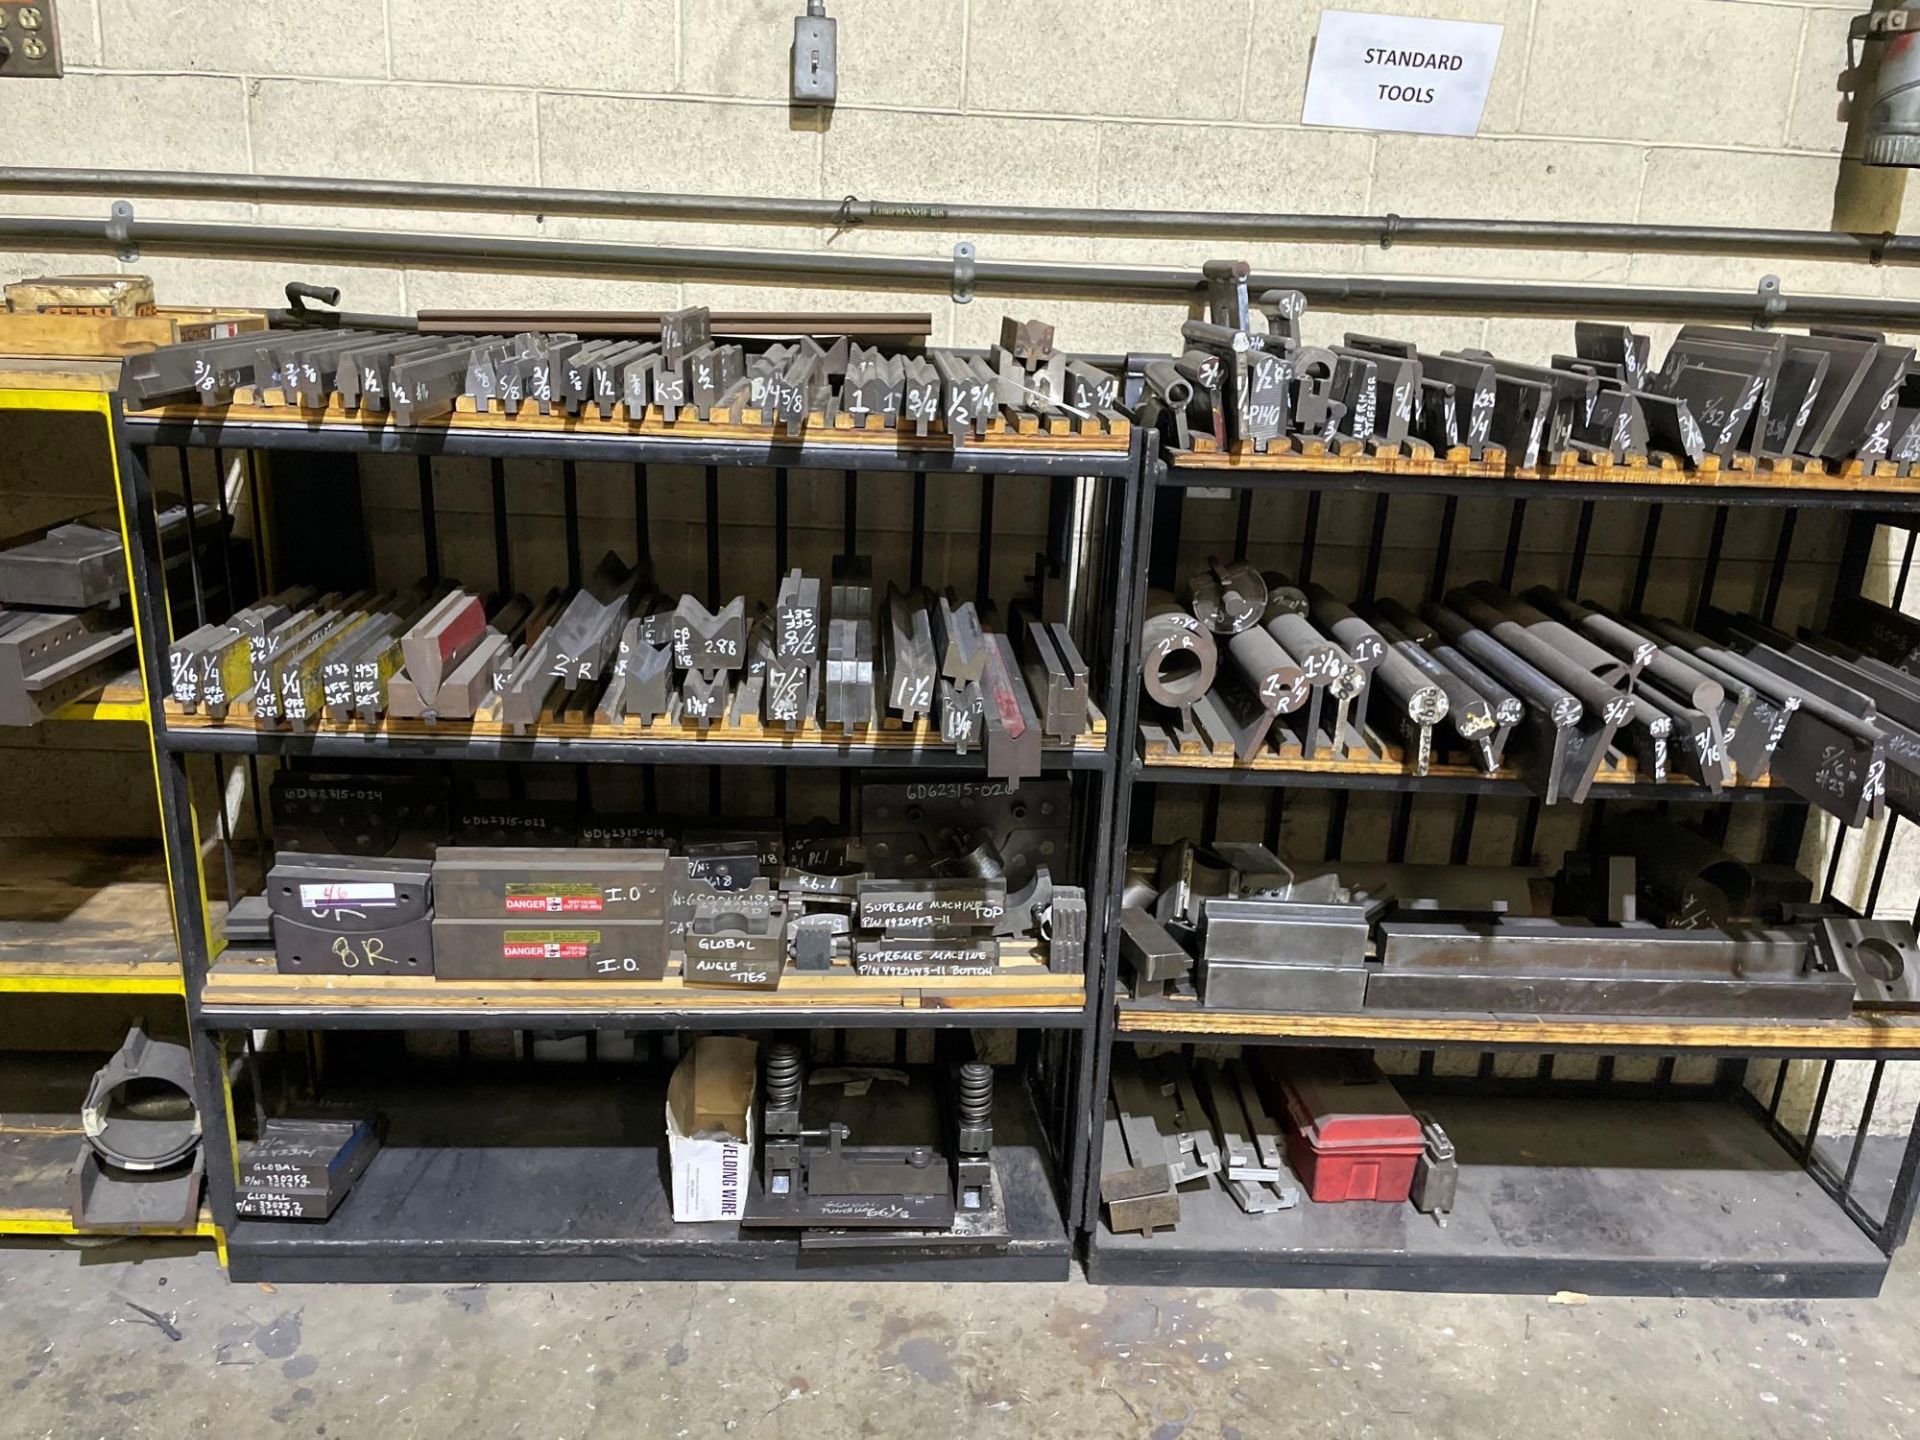 Assorted Dies for Press Brakes with Rack - Image 2 of 4